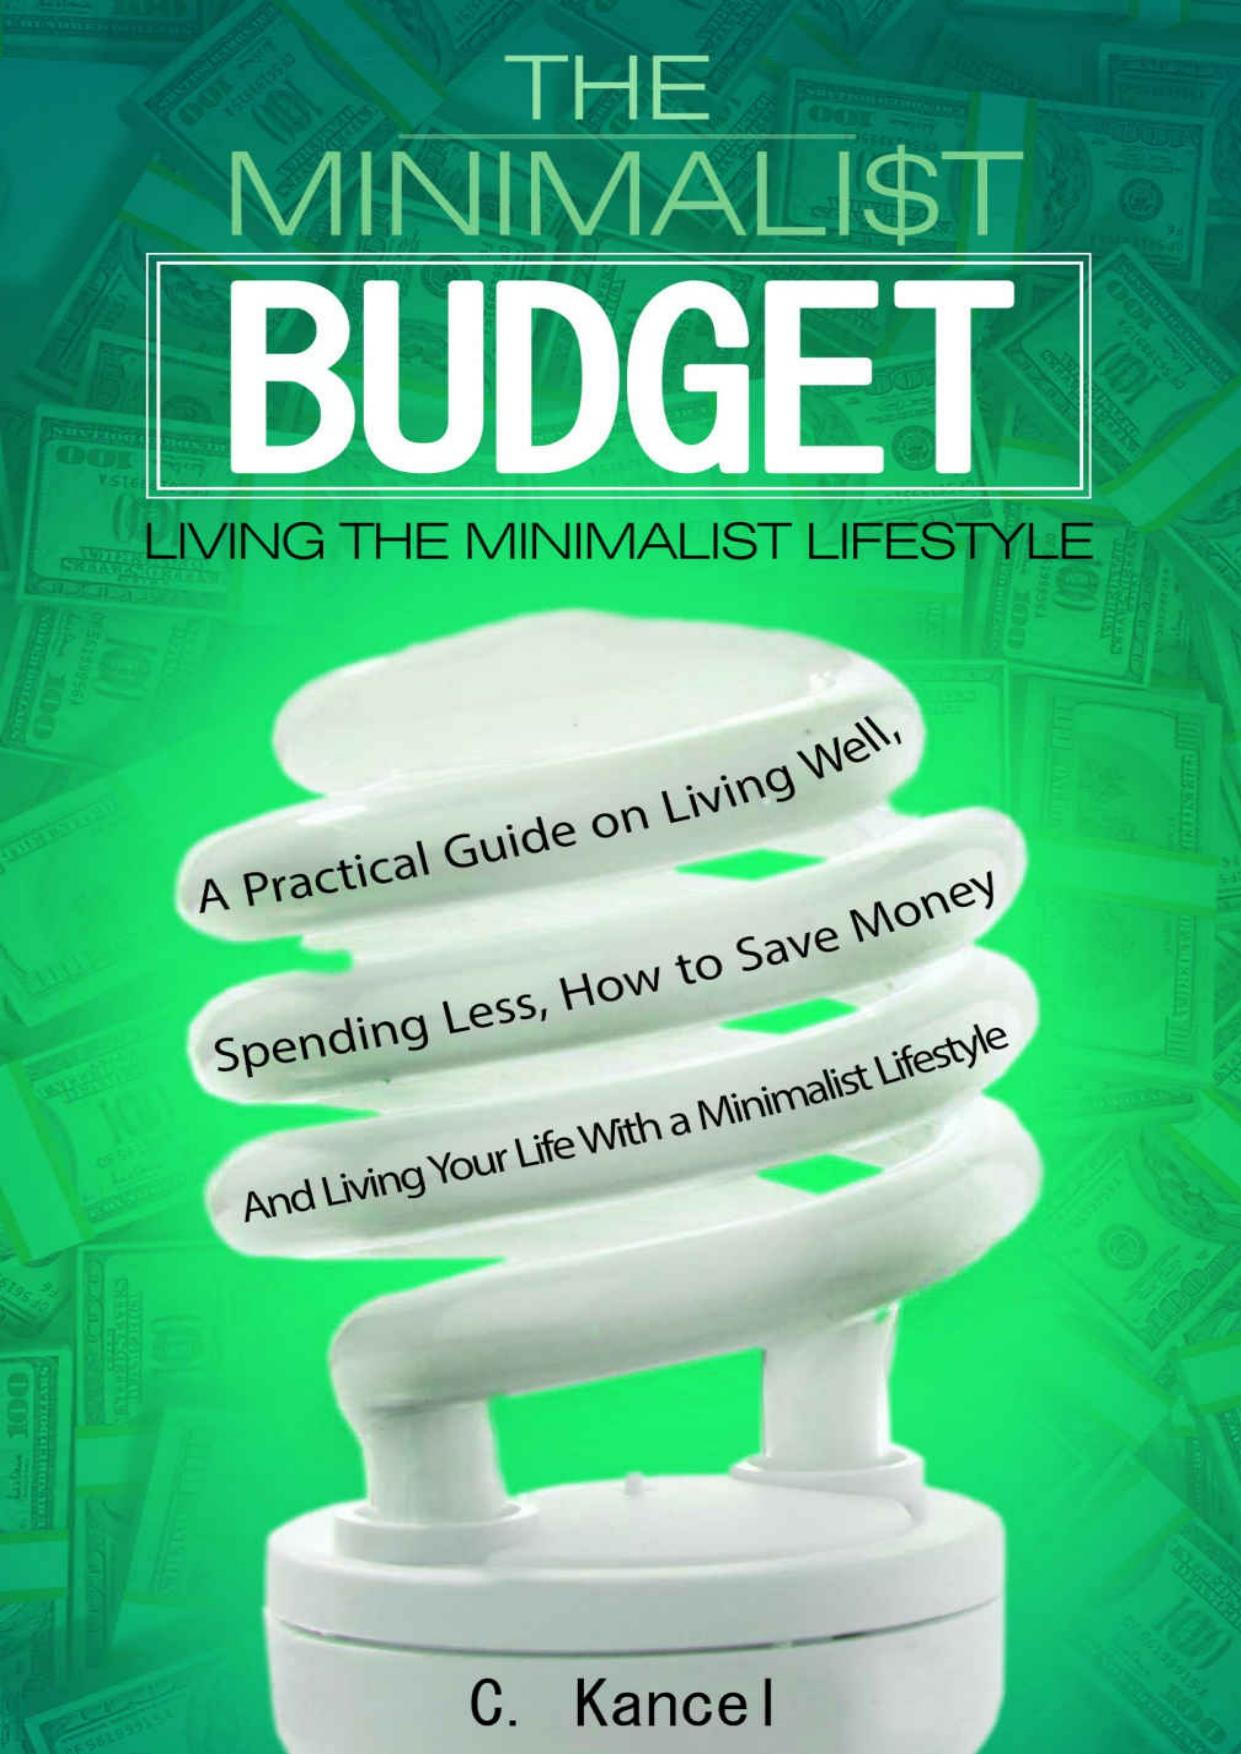 The Minimalist Budget: A Practical Guide on Living Well, Spending Less, How to Save Money and Living Your Life with a Minimalist Lifestyle